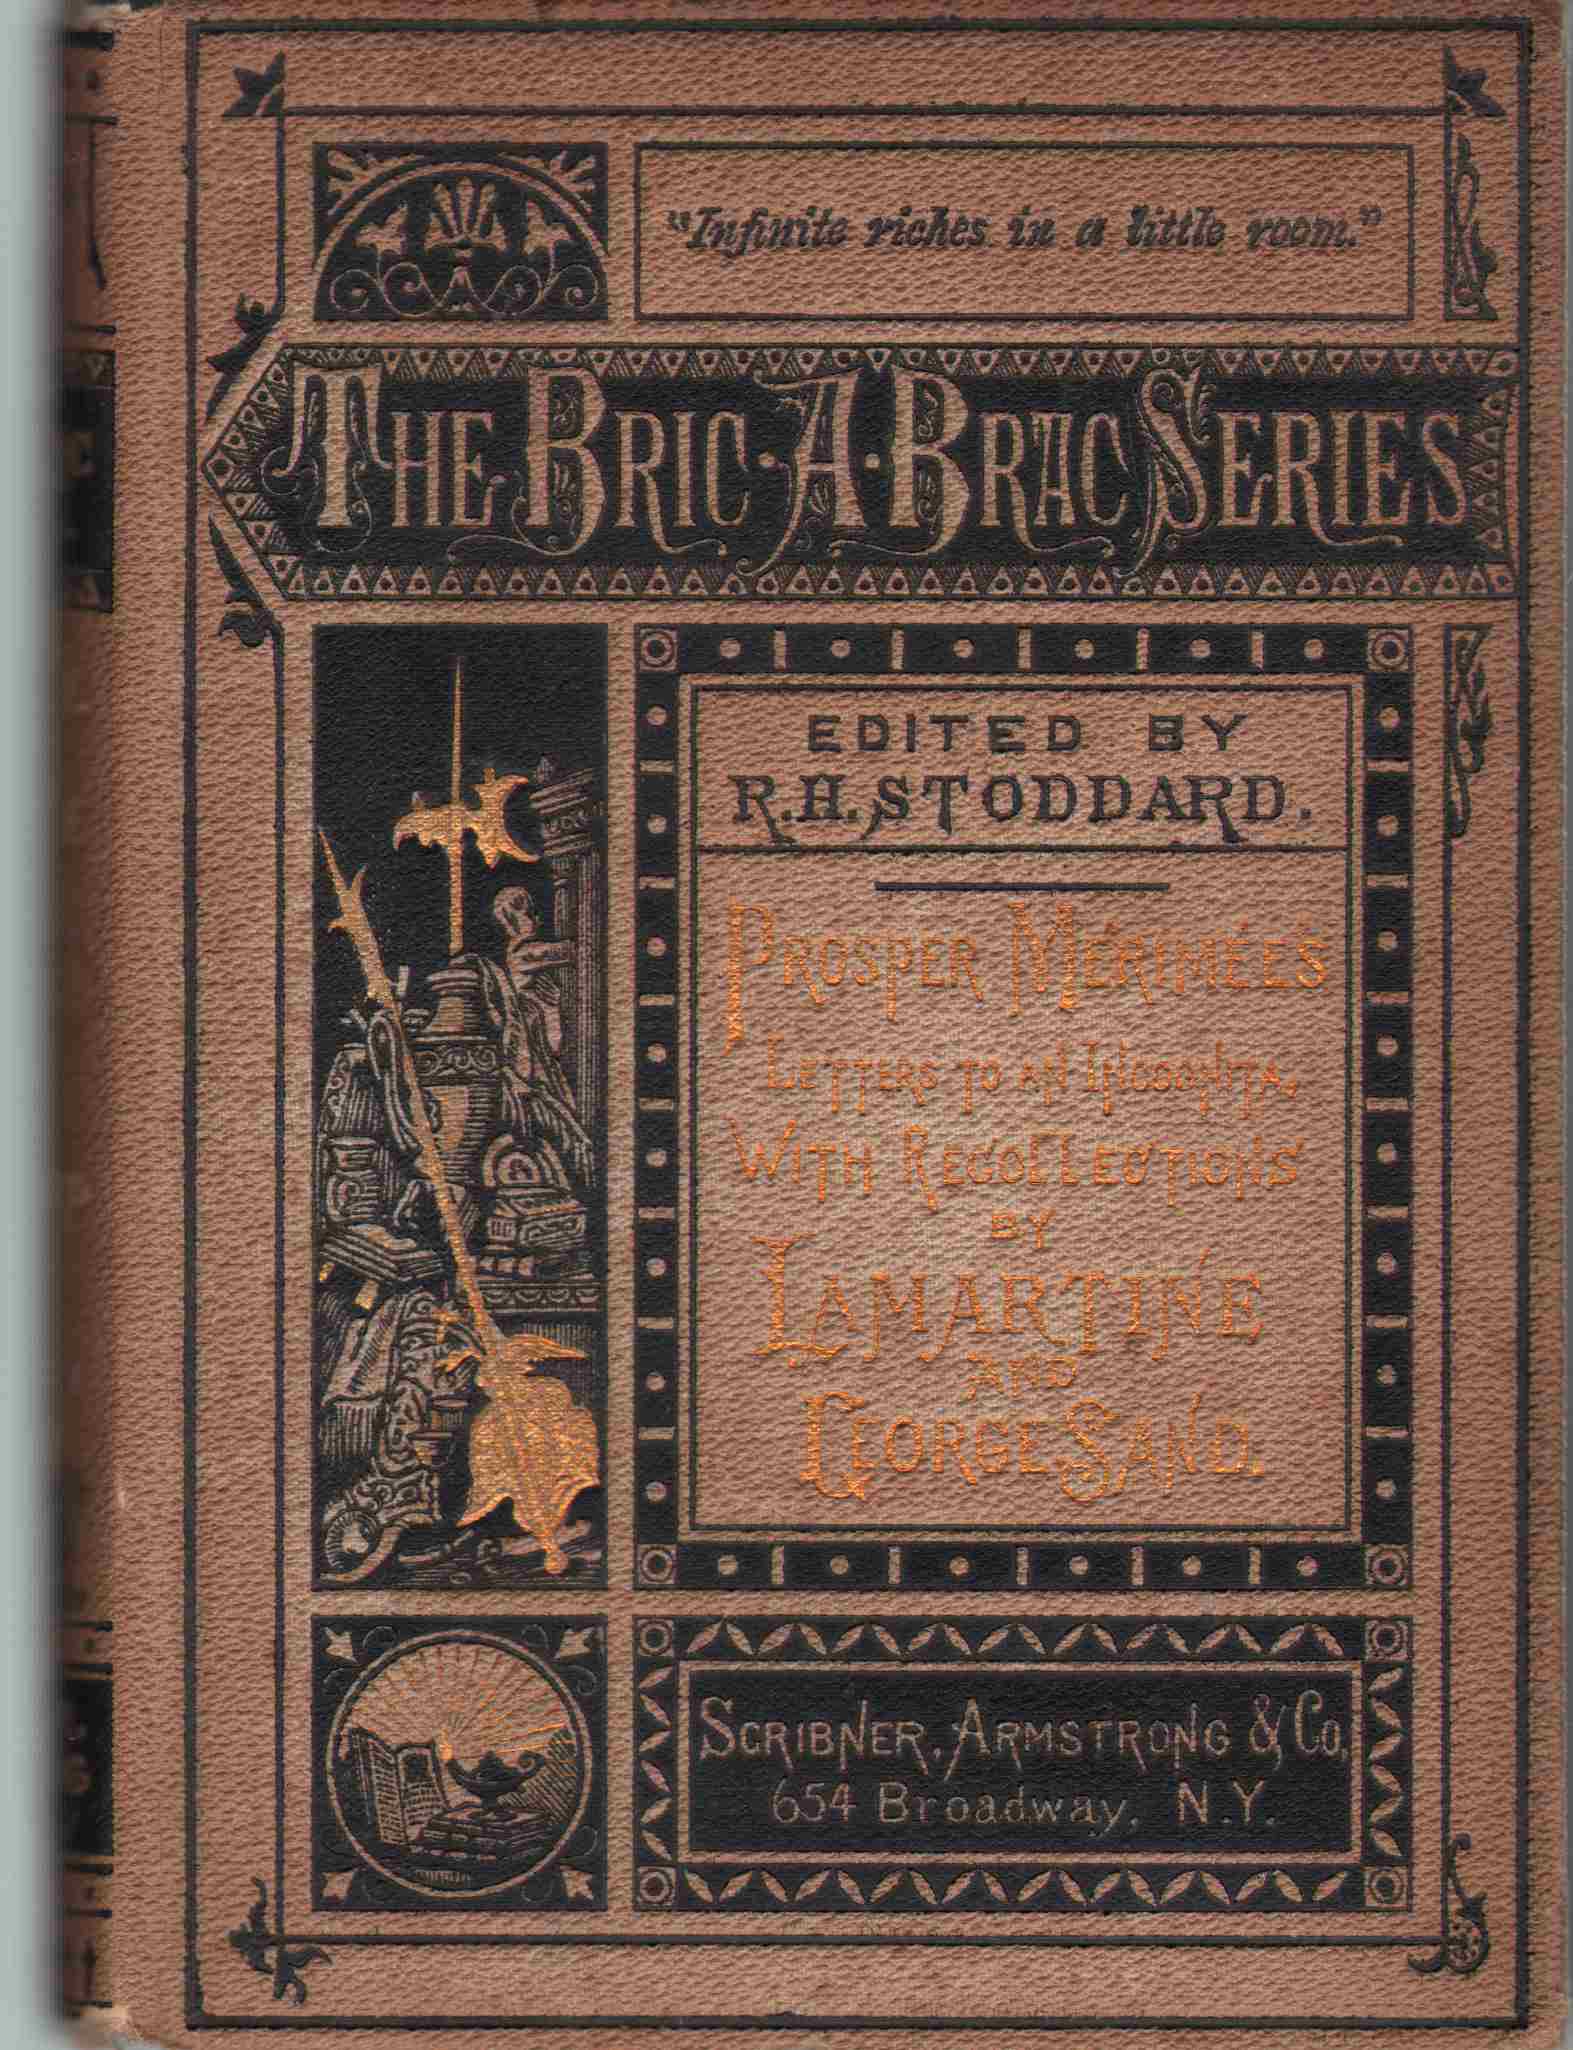 PROSPER MERIMEE'S LETTERS TO AN INCOGNITA With Recollections by Lamartine and George Sand The Bric-A-Brac Series, Volume III - Stoddard, R. H.